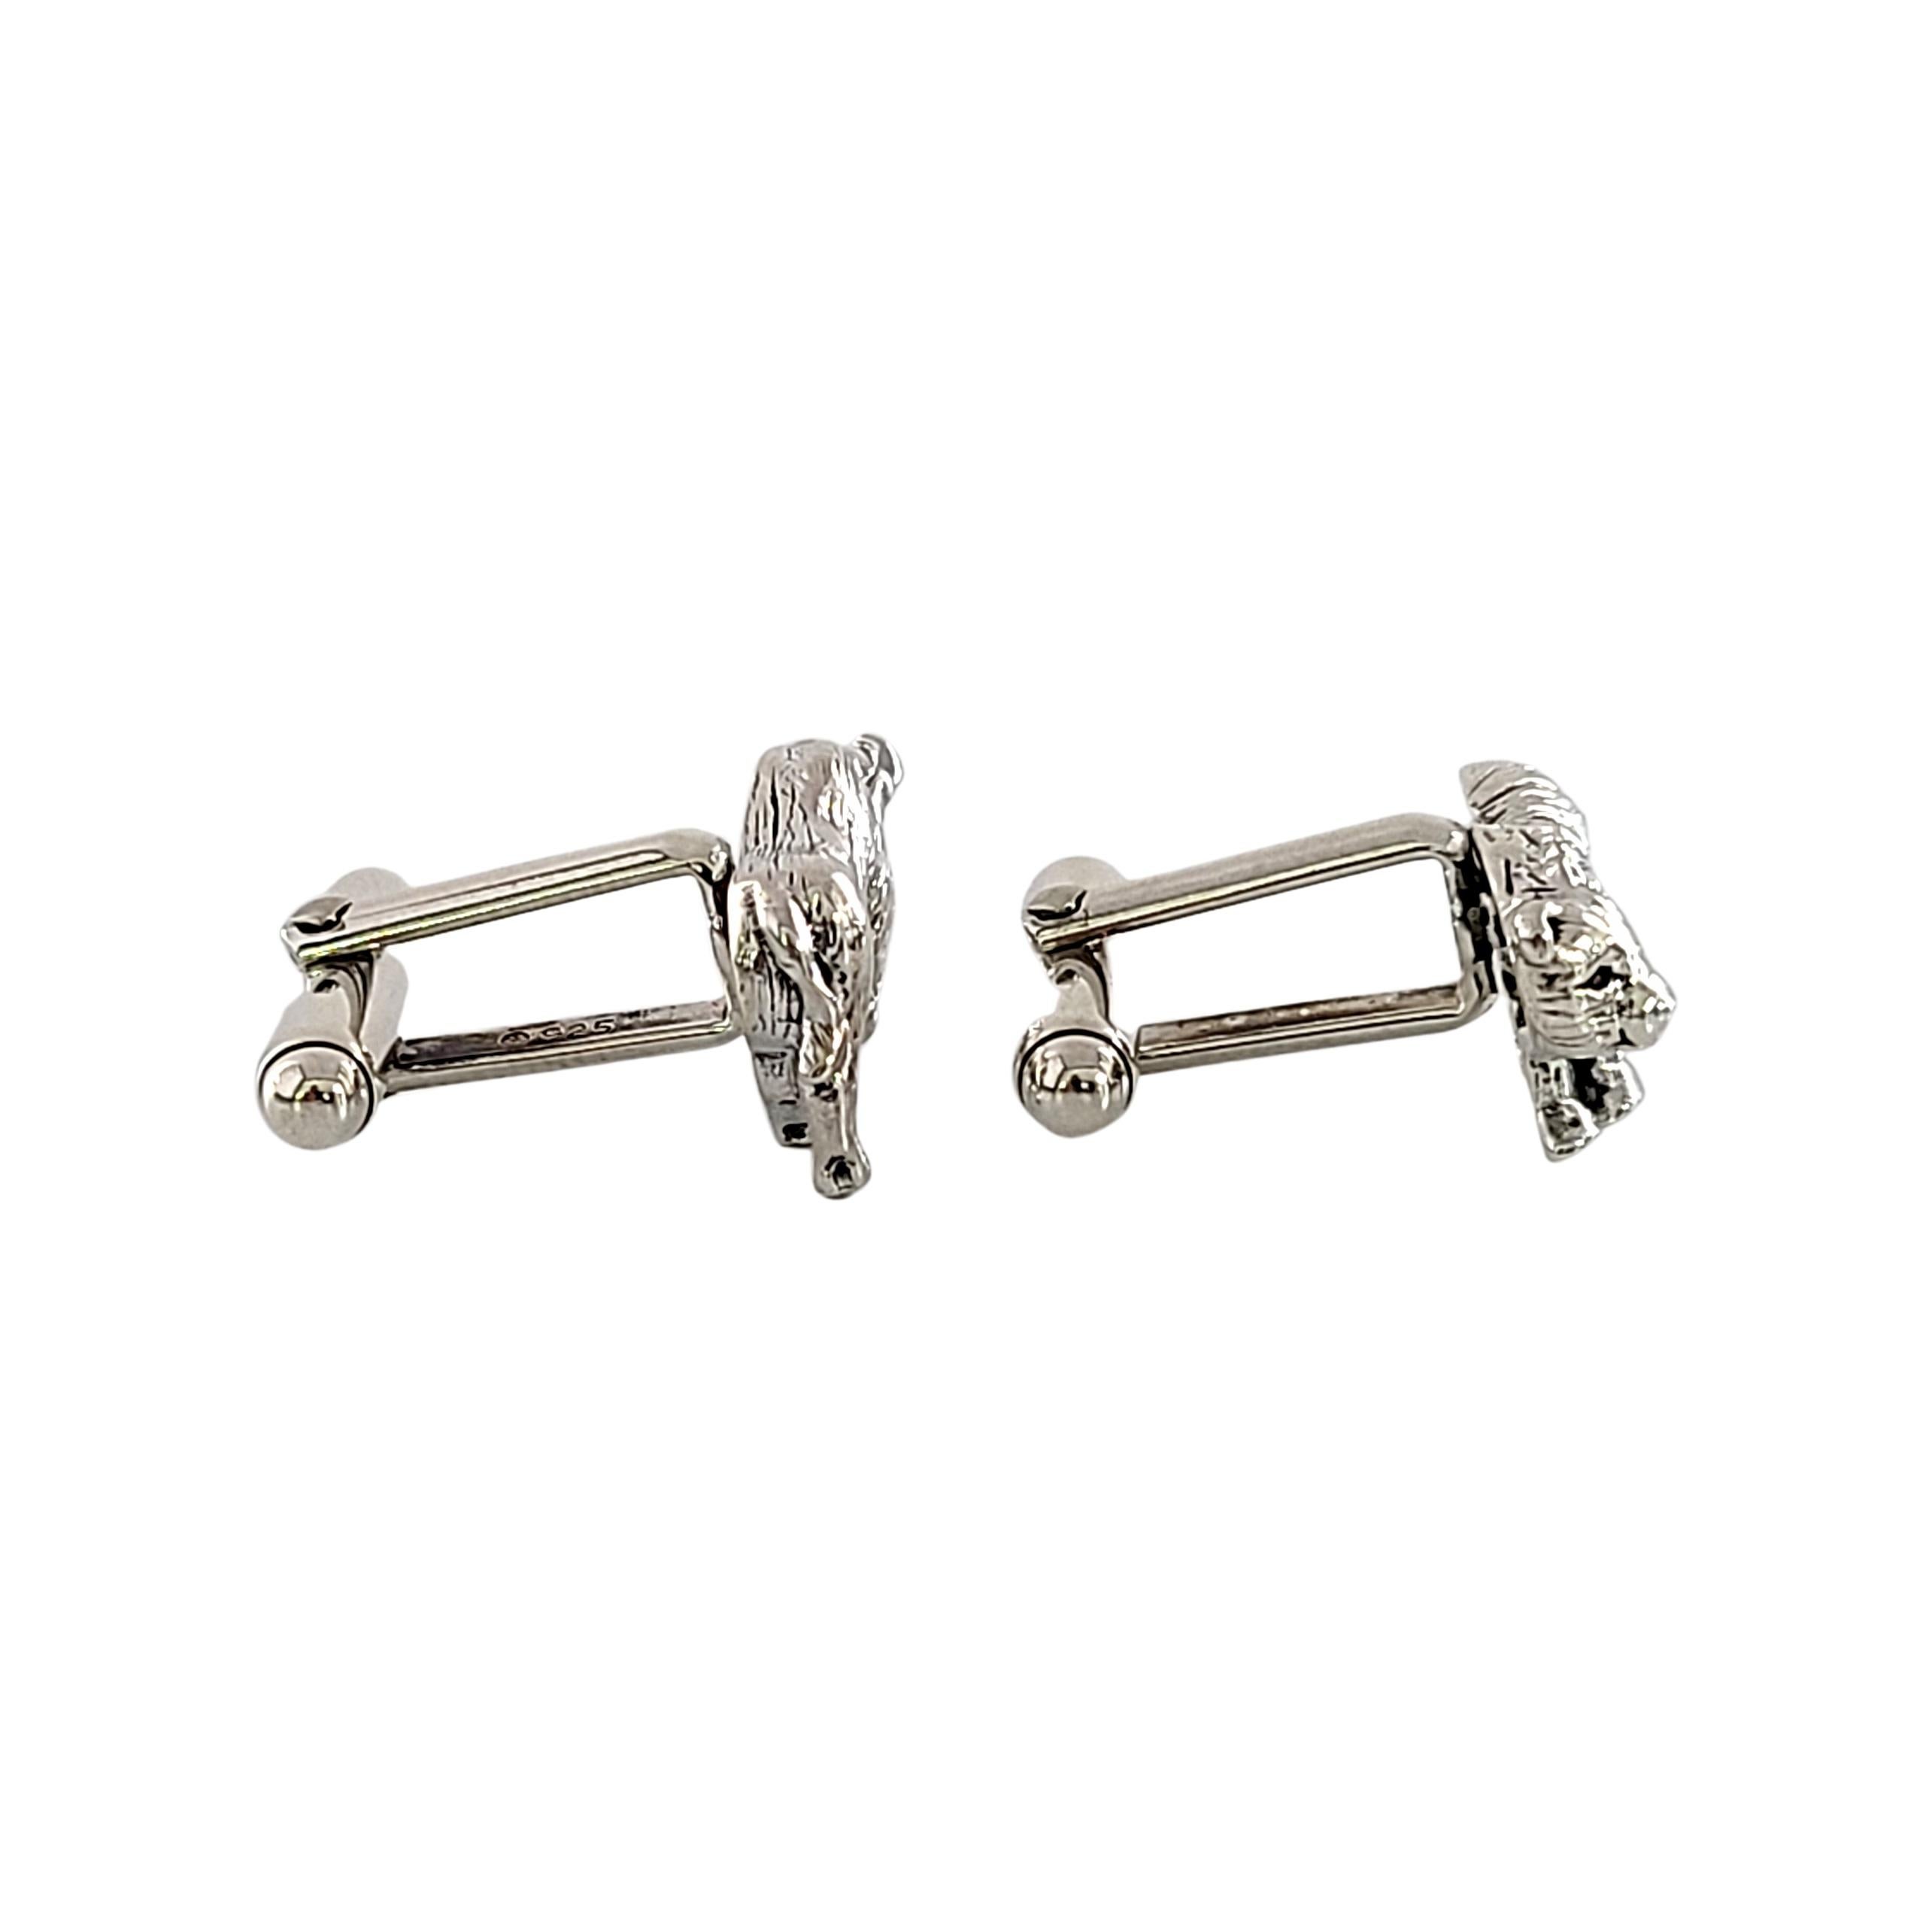 Tiffany & Co sterling silver bull and bear cufflinks.

Authentic Tiffany cufflinks featuring the classic stock market icons, a bull and a bear. Tiffany box and pouch not included.

Measures approx 3/4